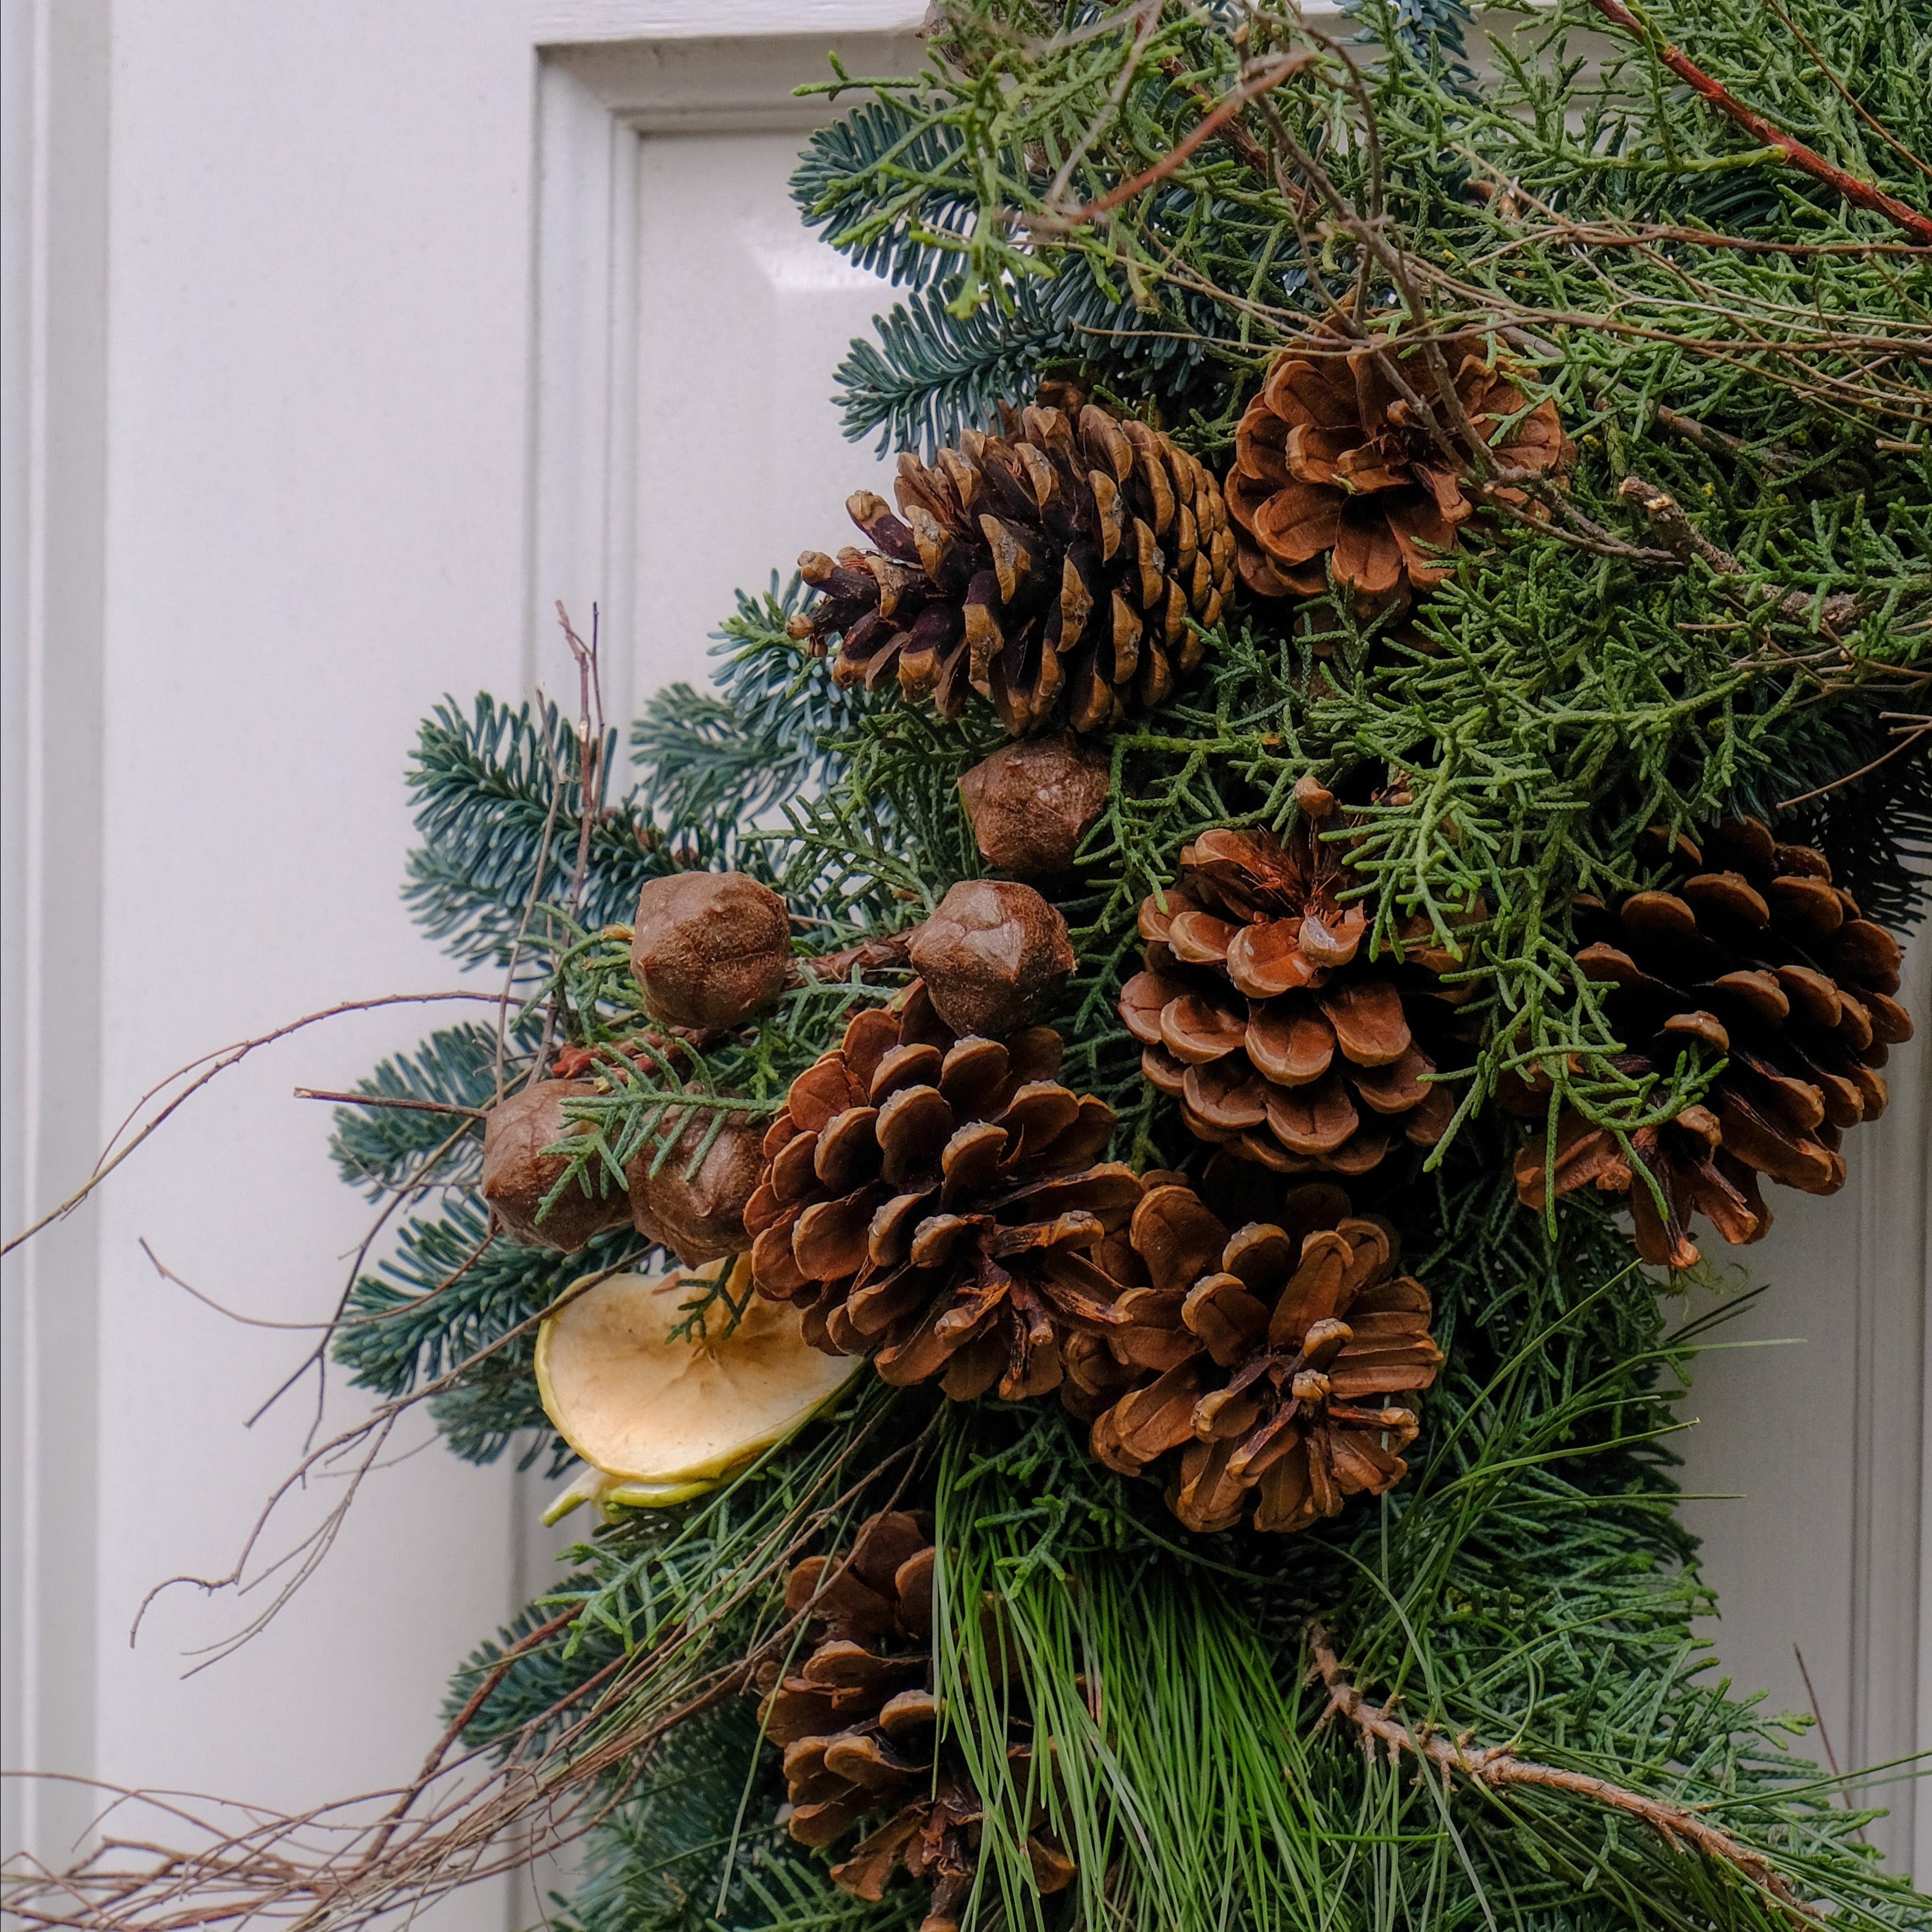 festive Christmas wreath with pine cones and dried apple slices